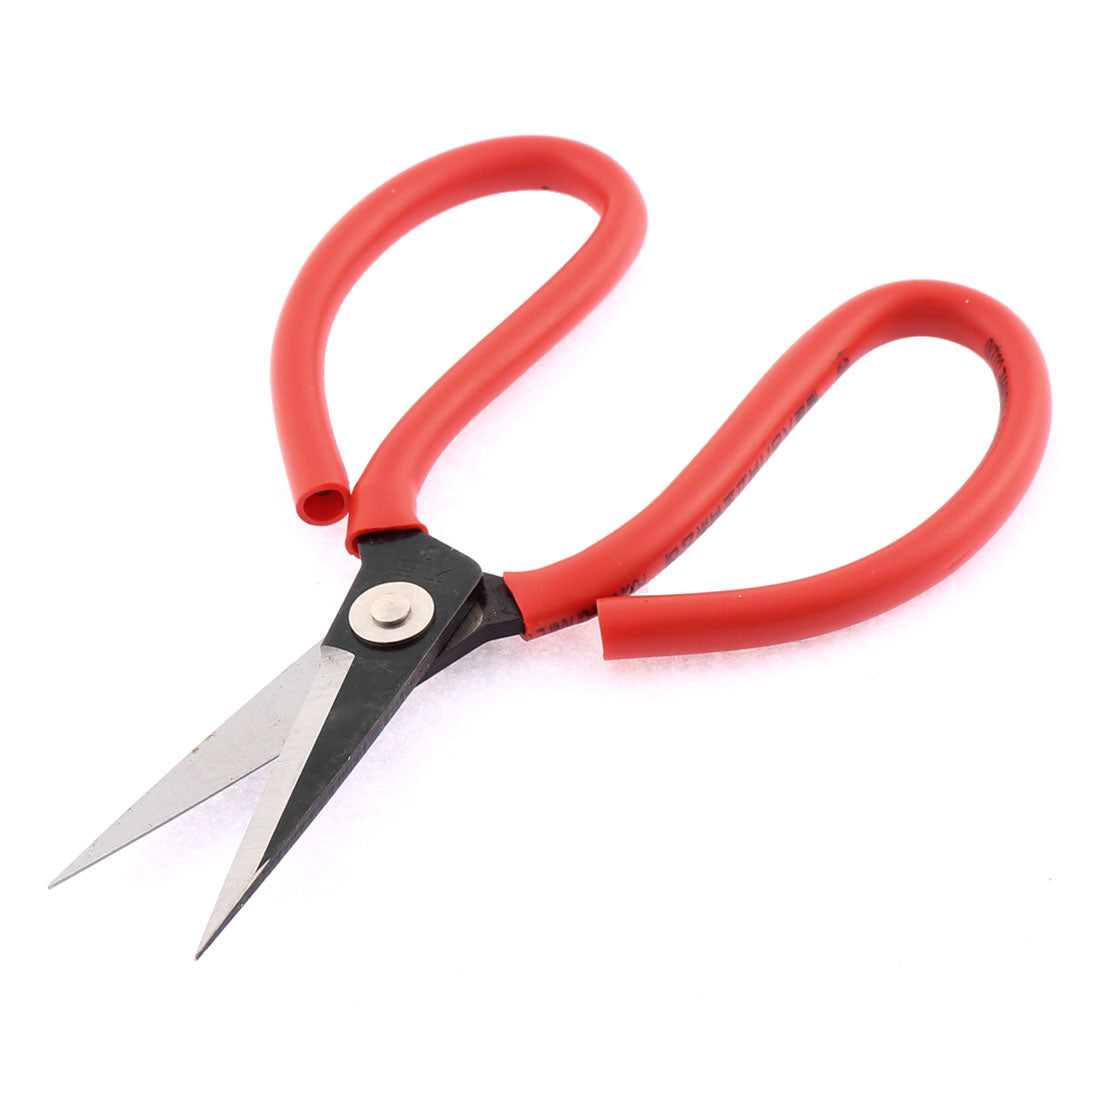 uxcell Uxcell Home Red Rubber Coated Handle Metal Cutter Scissors 6.5 Inches Long